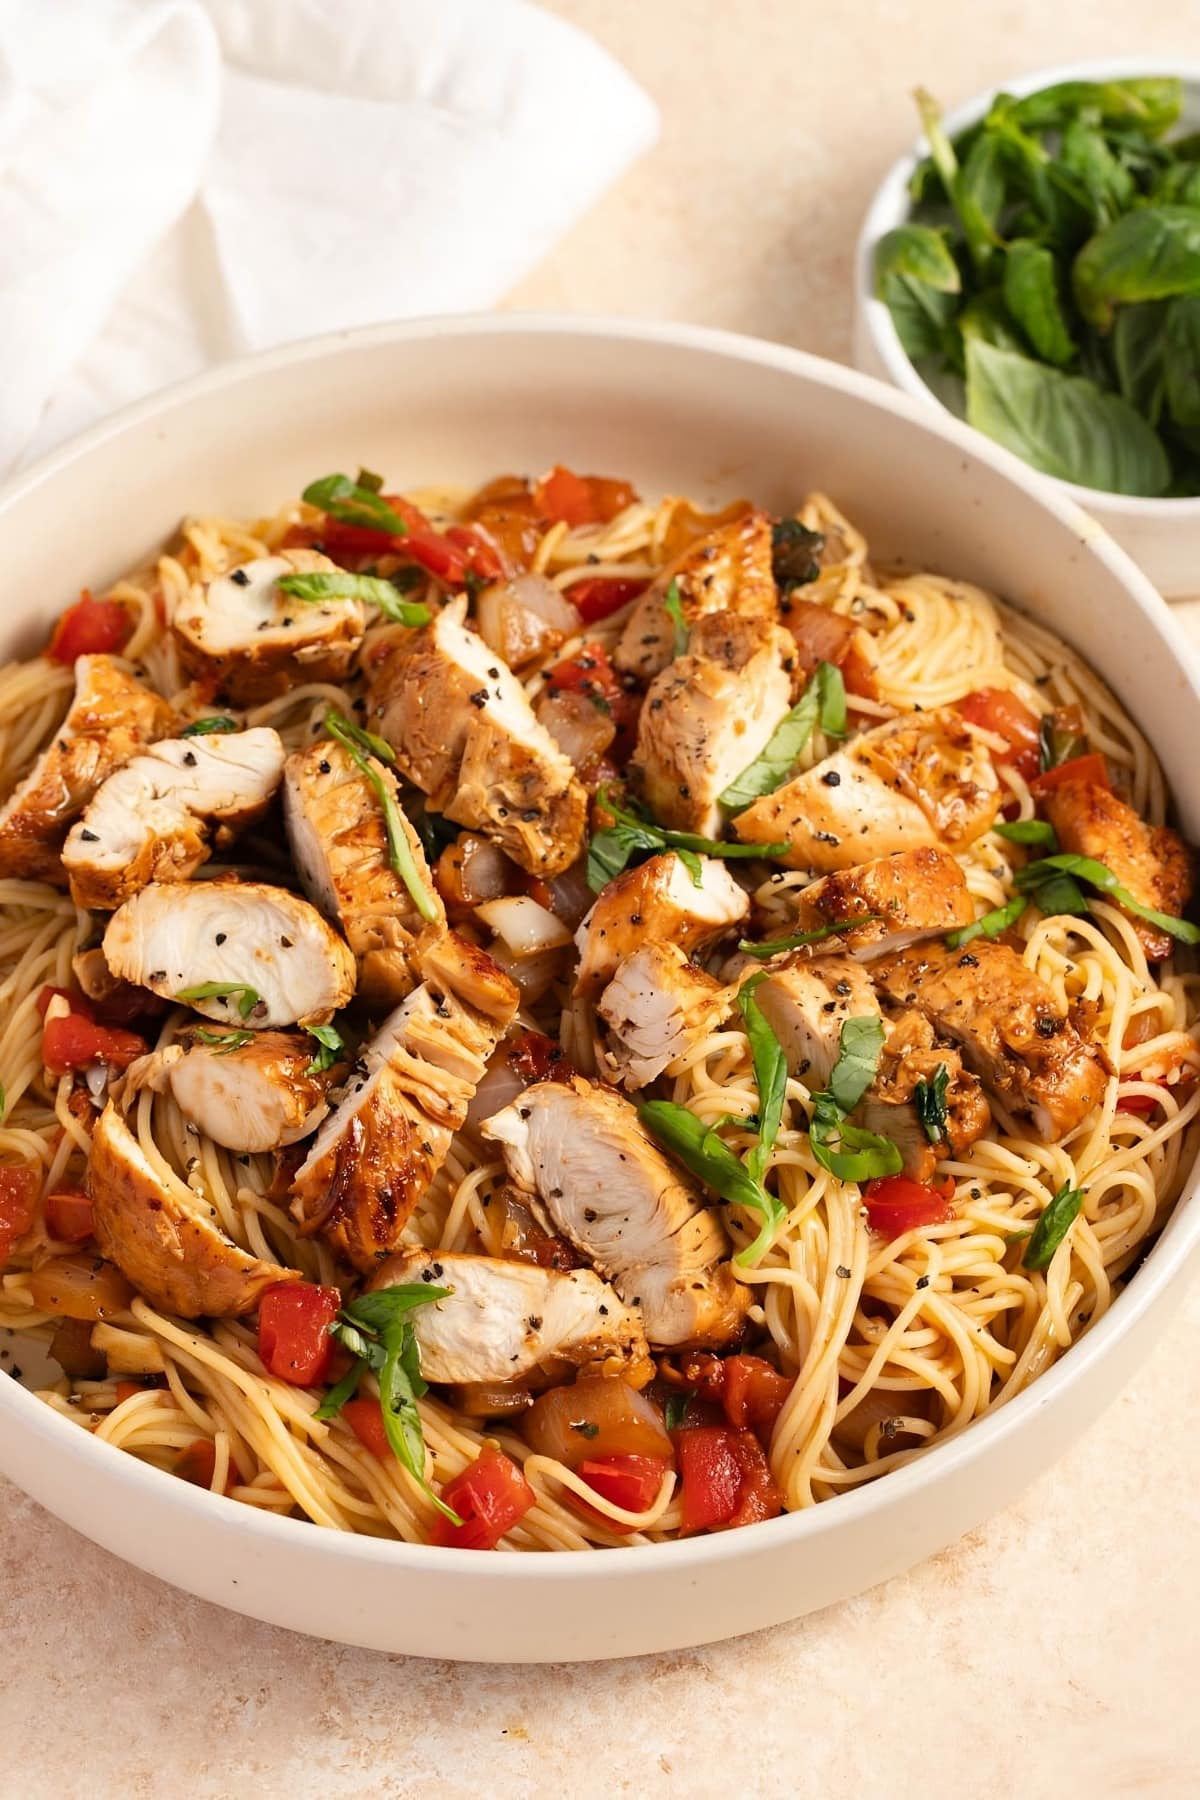 Bruschetta Chicken Pasta with Tomatoes and Herbs in a white bowl